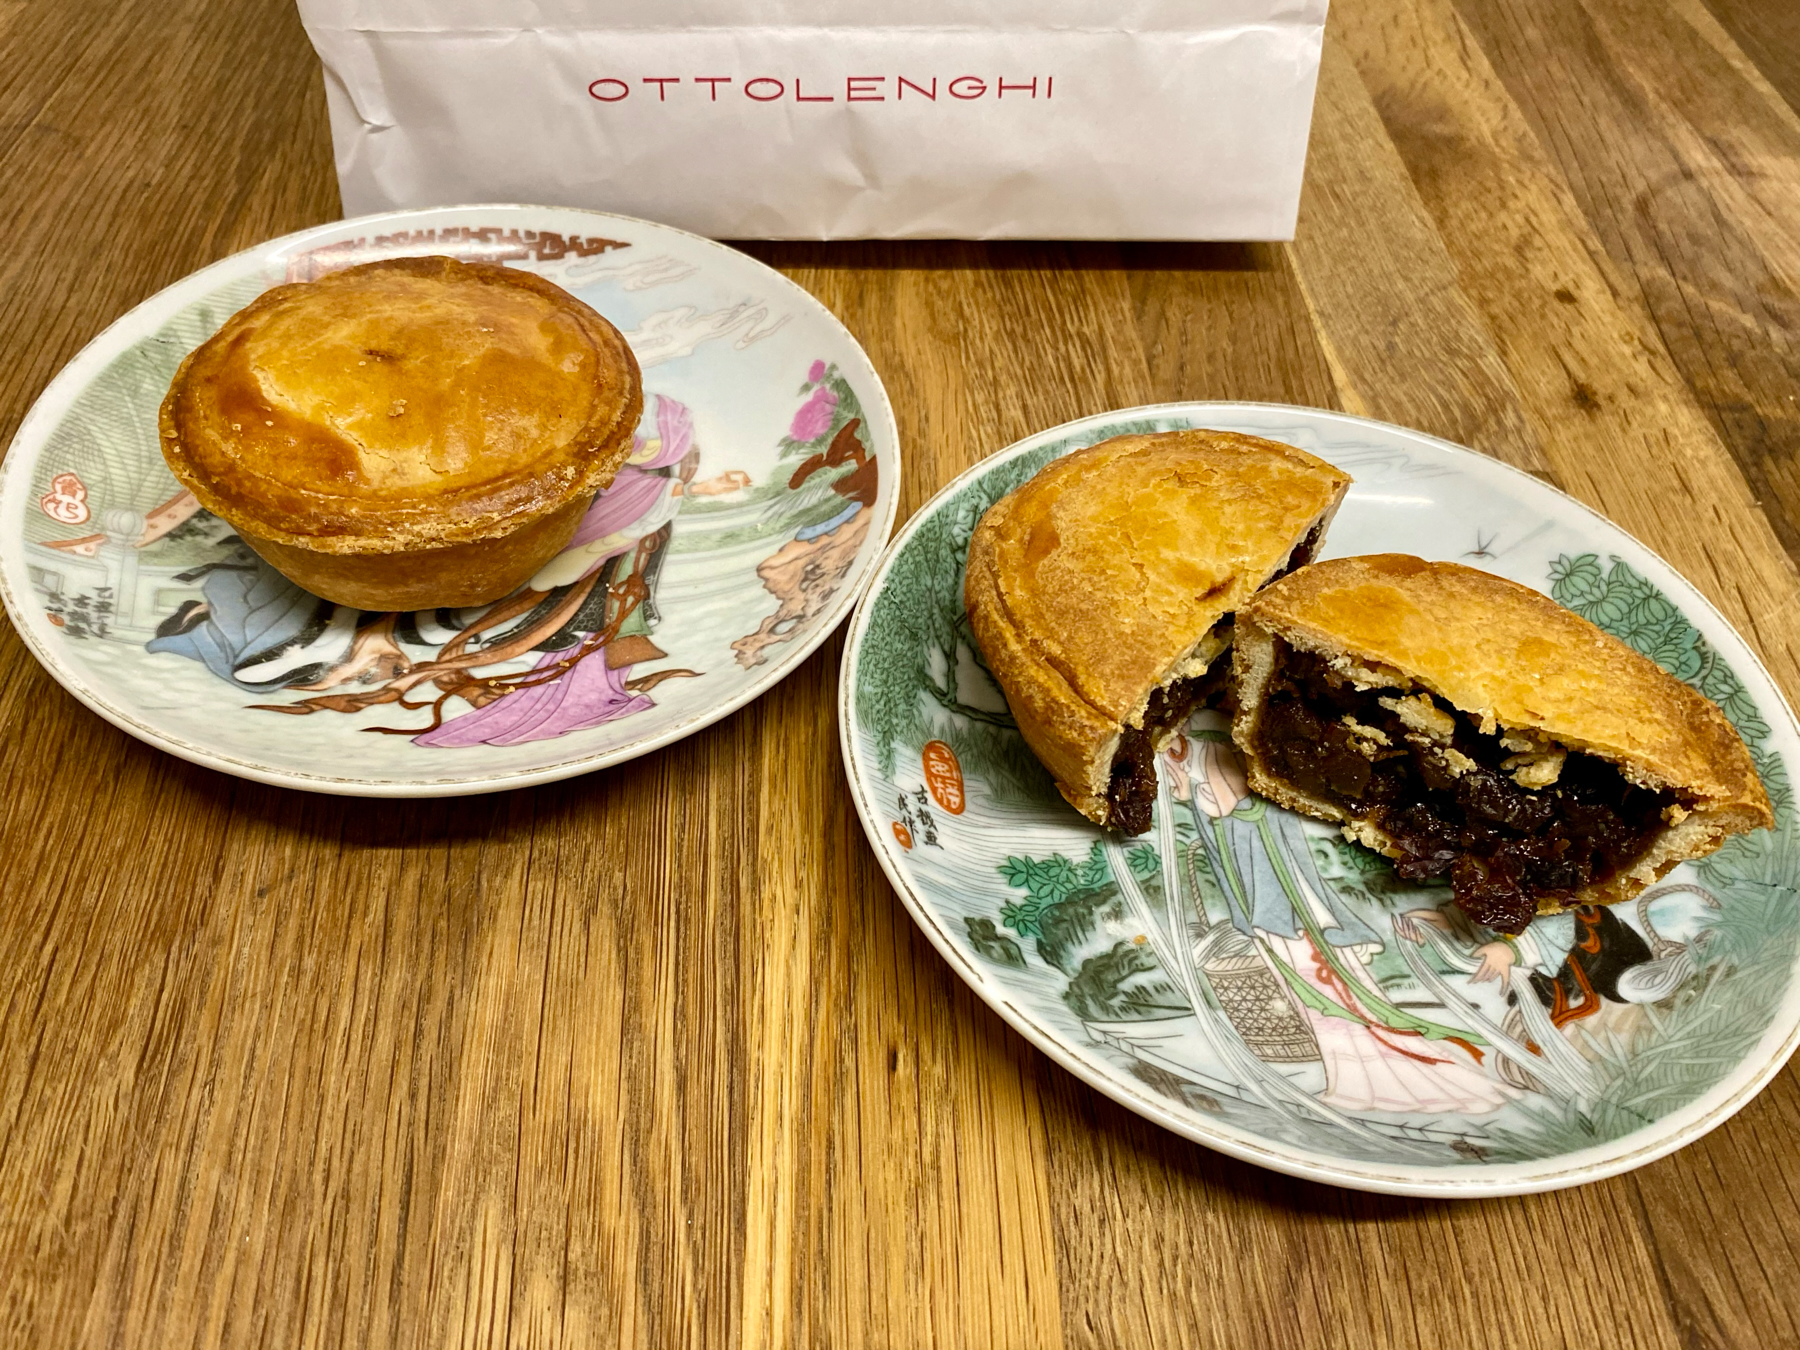 A whole pie and a sliced open pie revealing a dark filling on decorative plates, with a OTTOLENGHI branded bag in the background, all on a wooden surface.